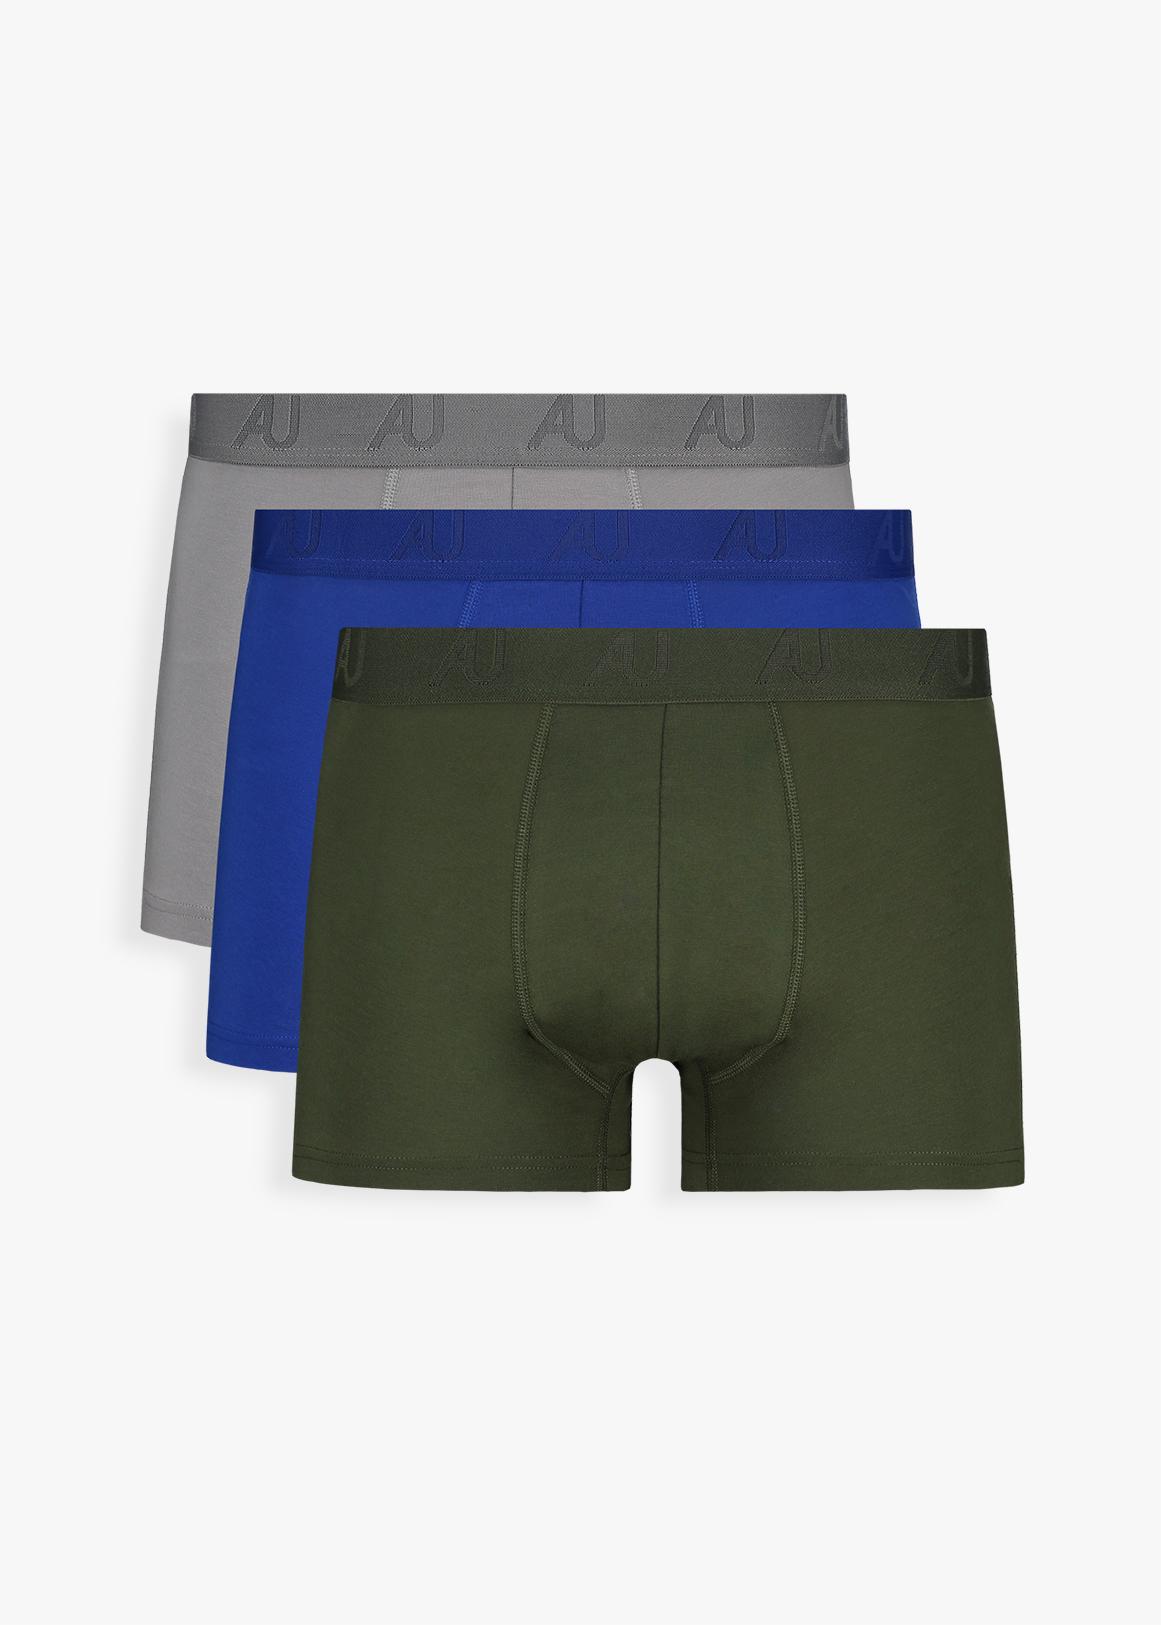 StayNew COOLTECH Stretch Cotton Trunks 3 Pack